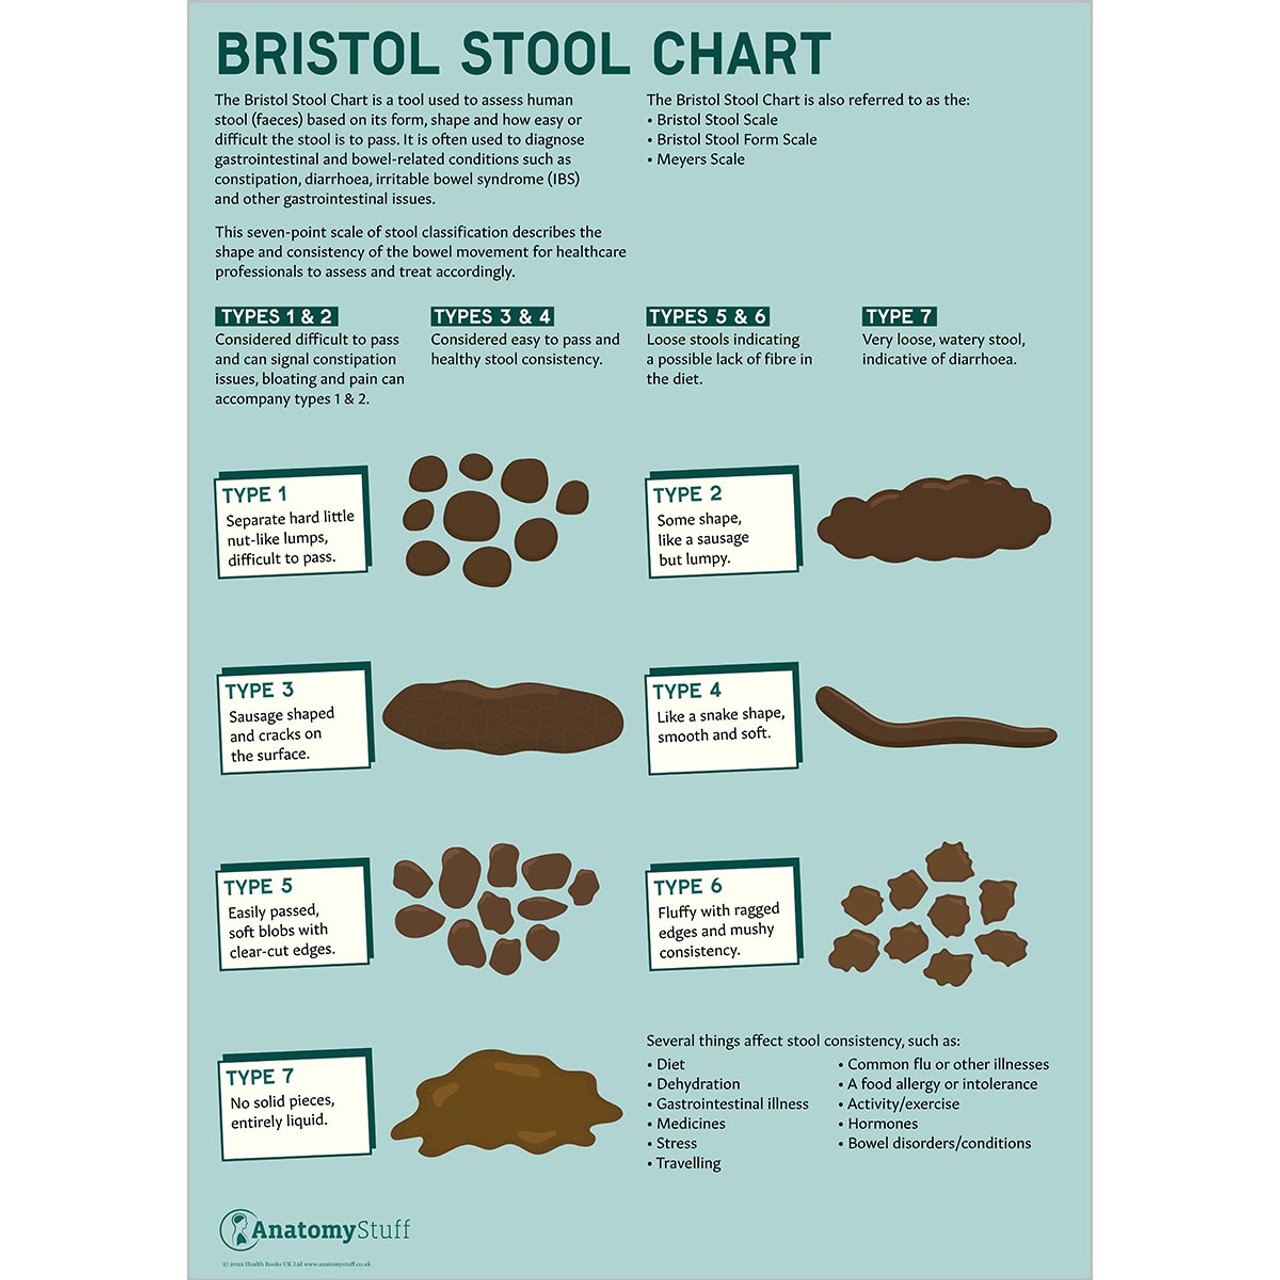 Bristol Stool Chart for identifying bowel movement consistency | Poster